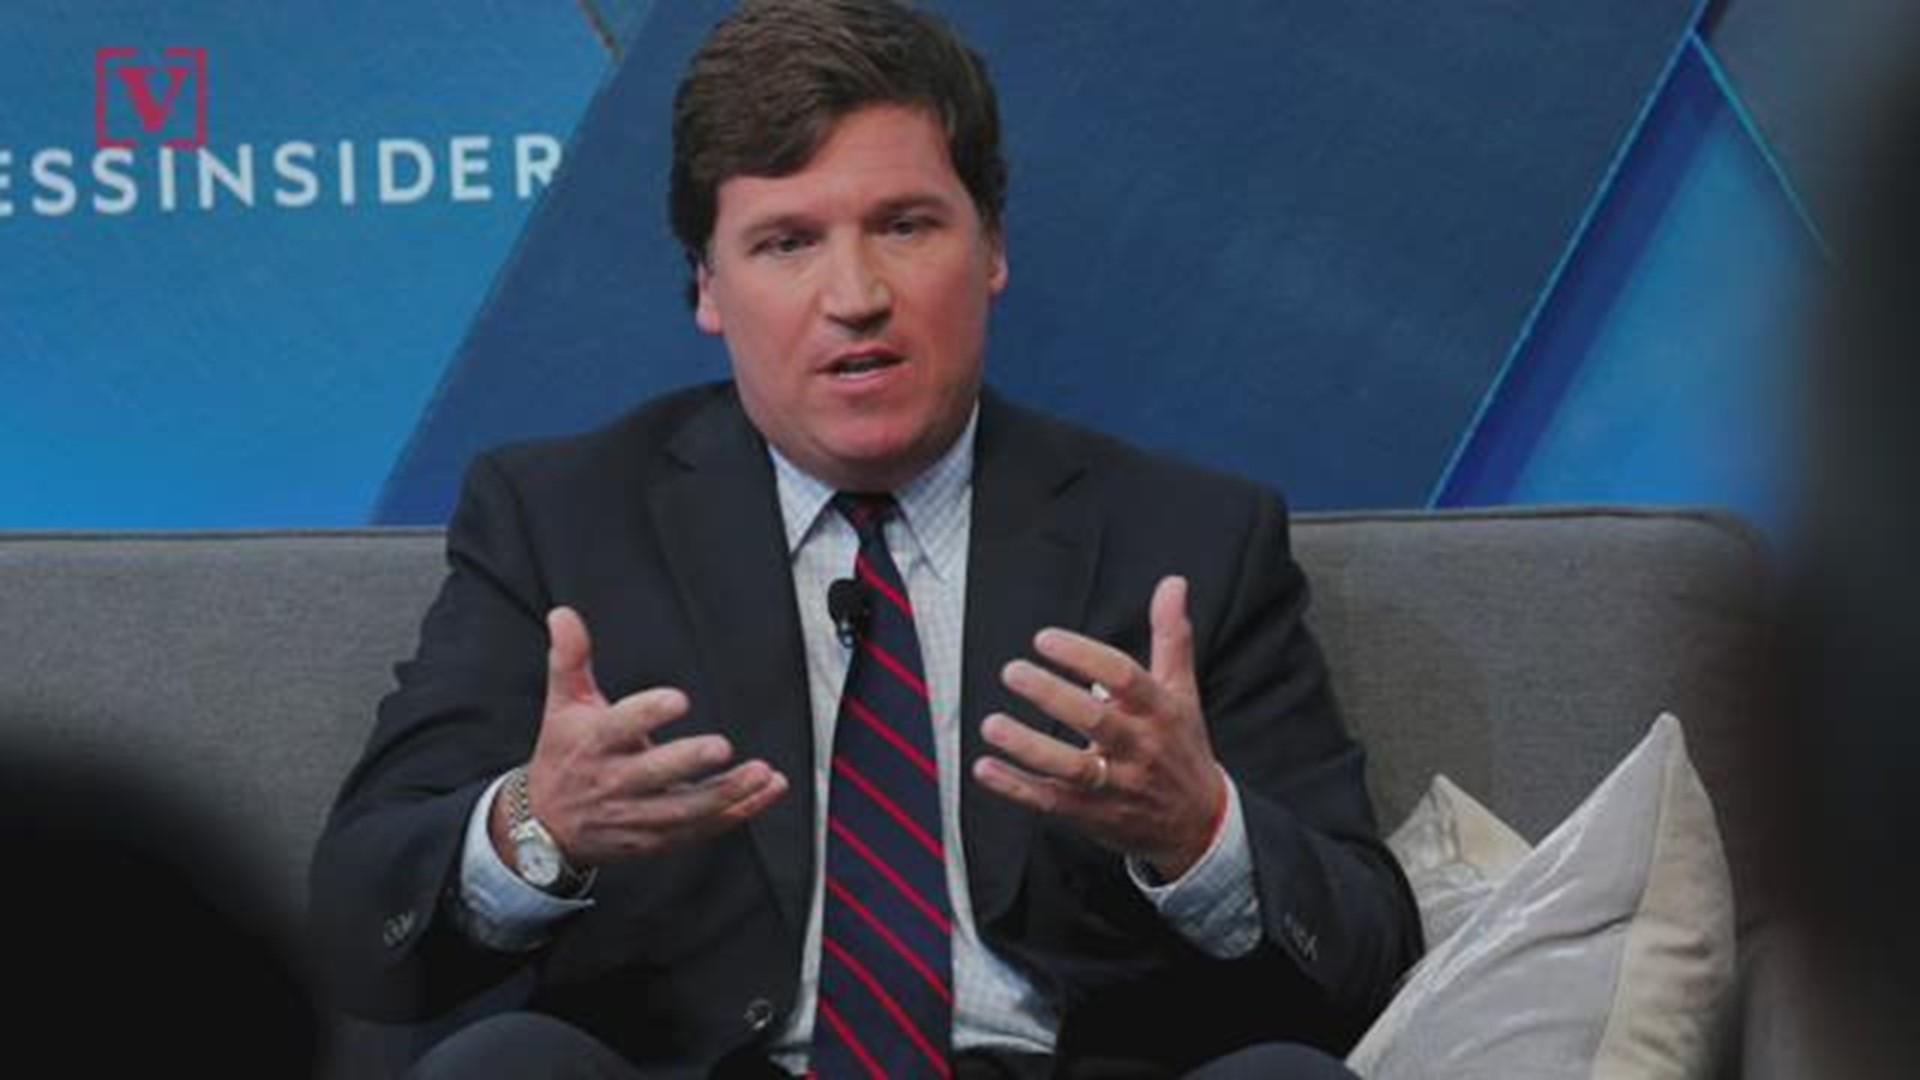 Lawyer Michael Avenatti released a video of Fox News Host Tucker Carlson allegedly threatening a country club patron, who is now his new client.